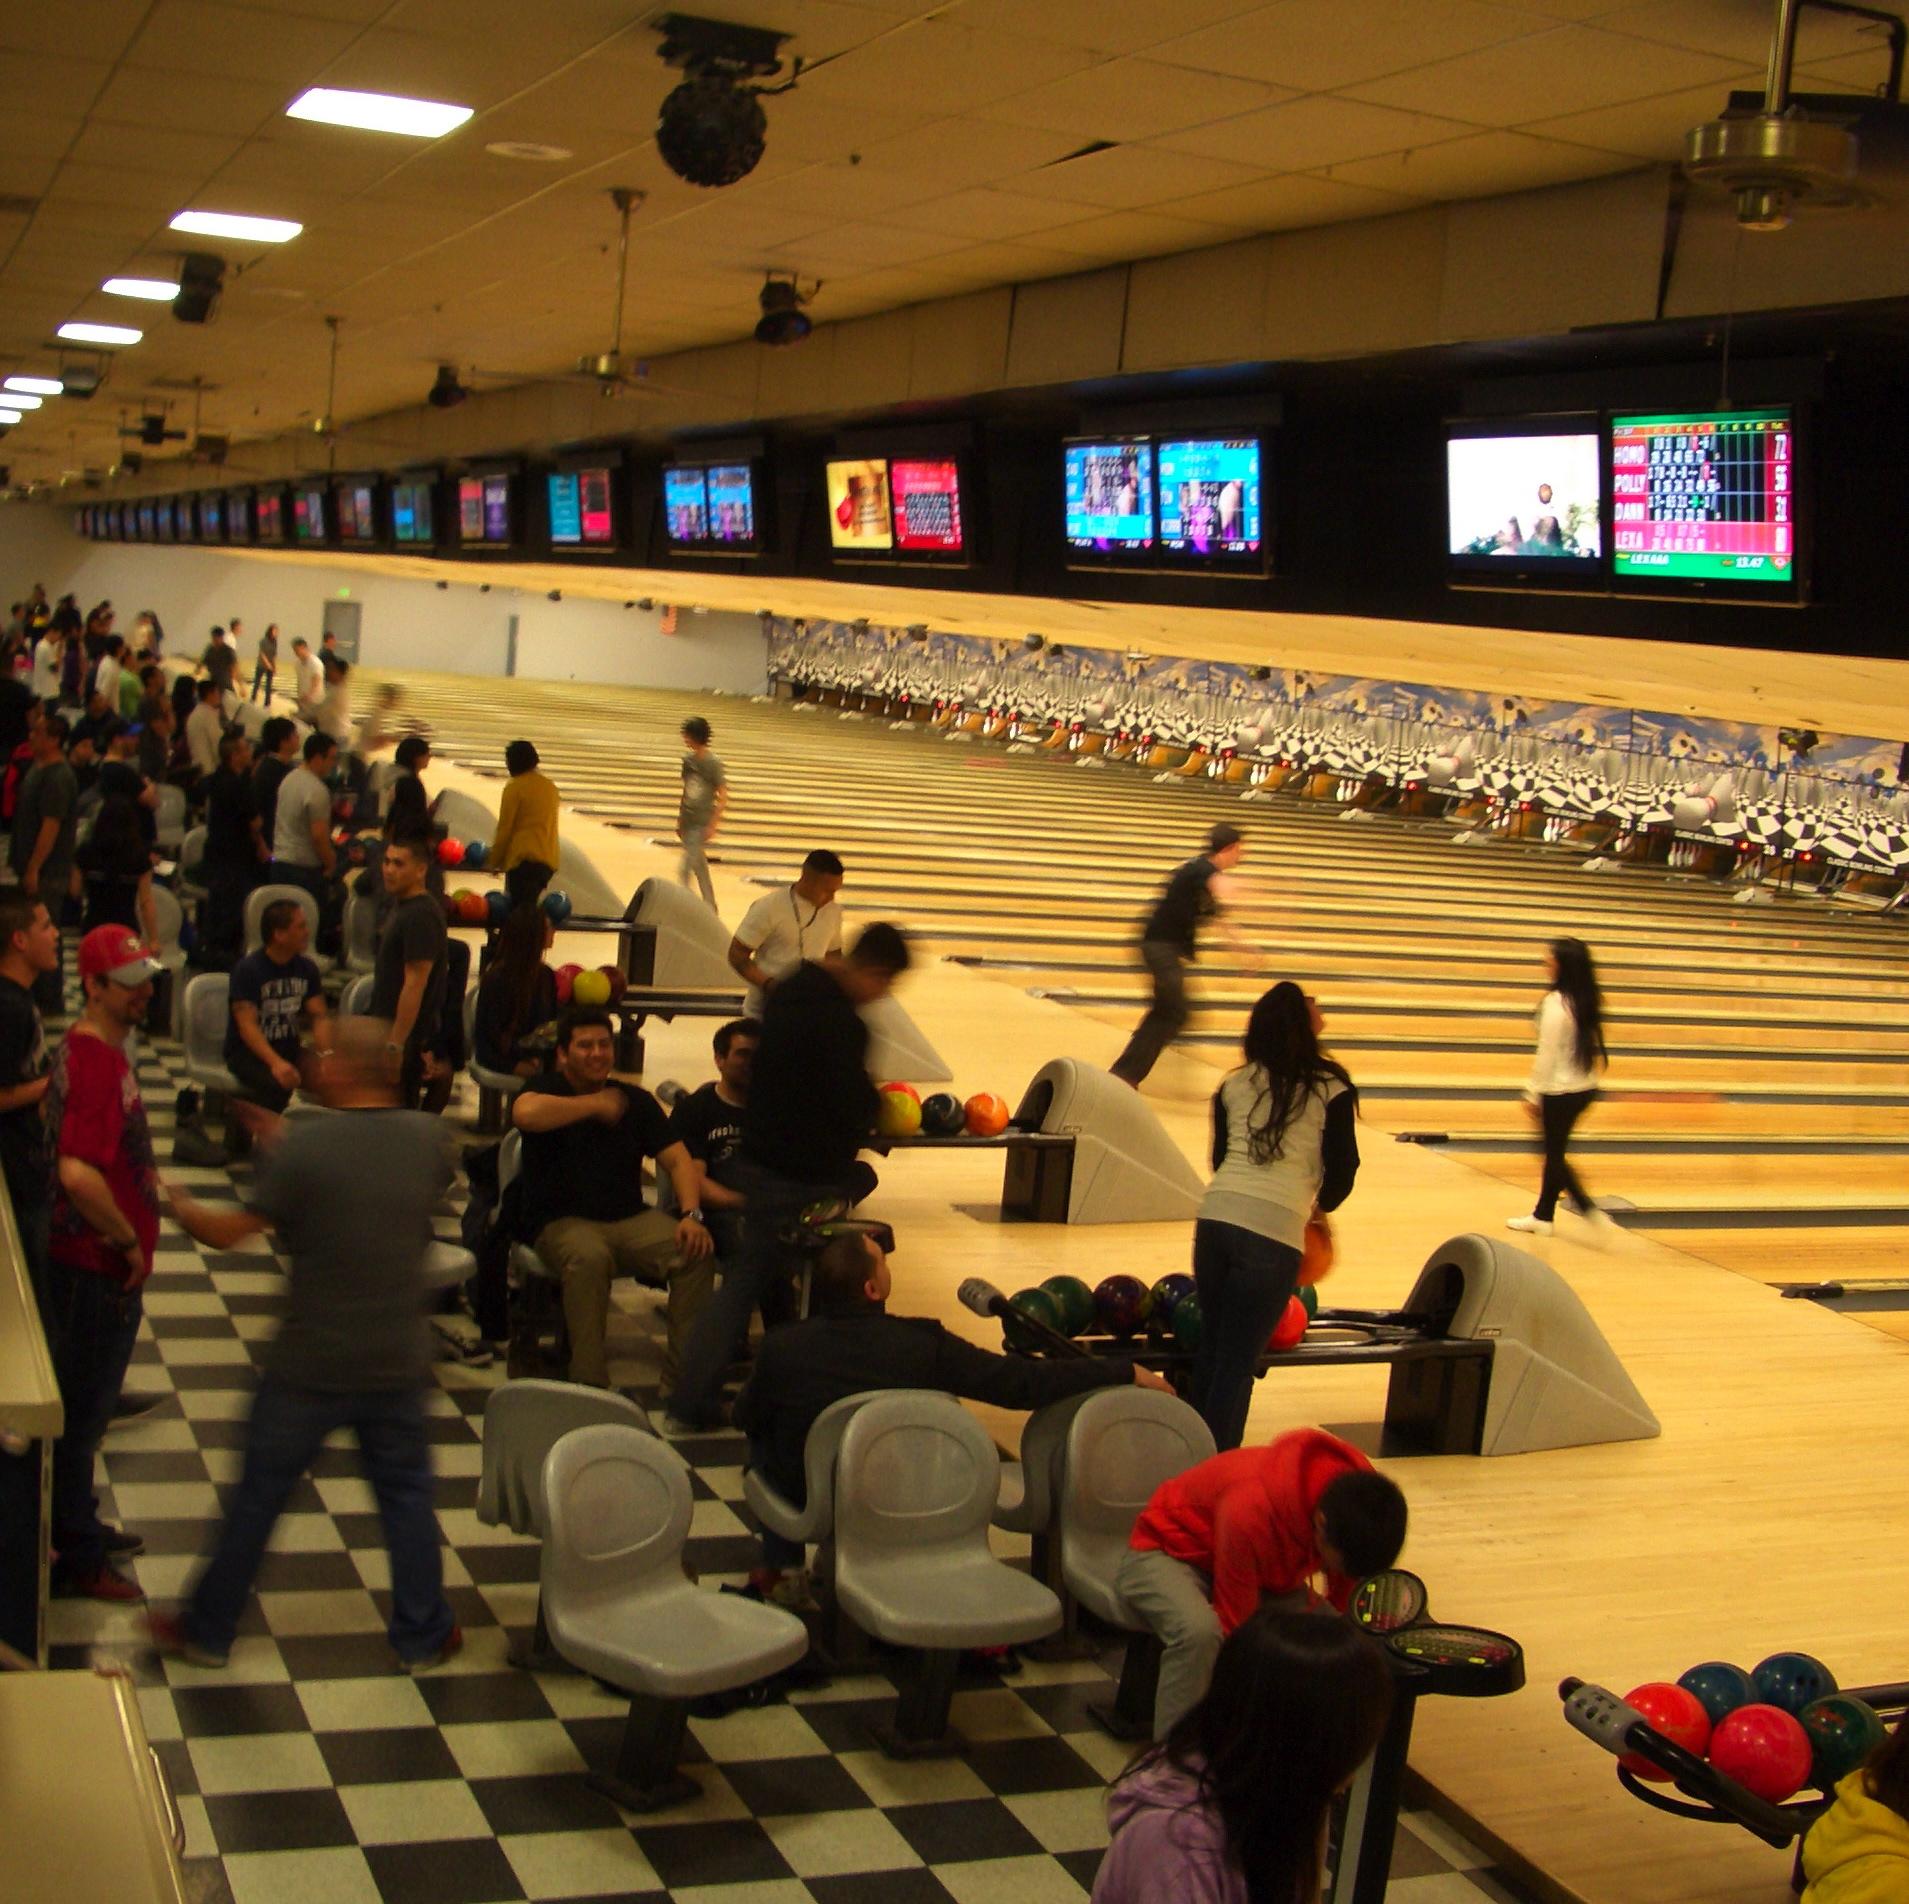 Bowling alley acts like community center in Daly City | KALW